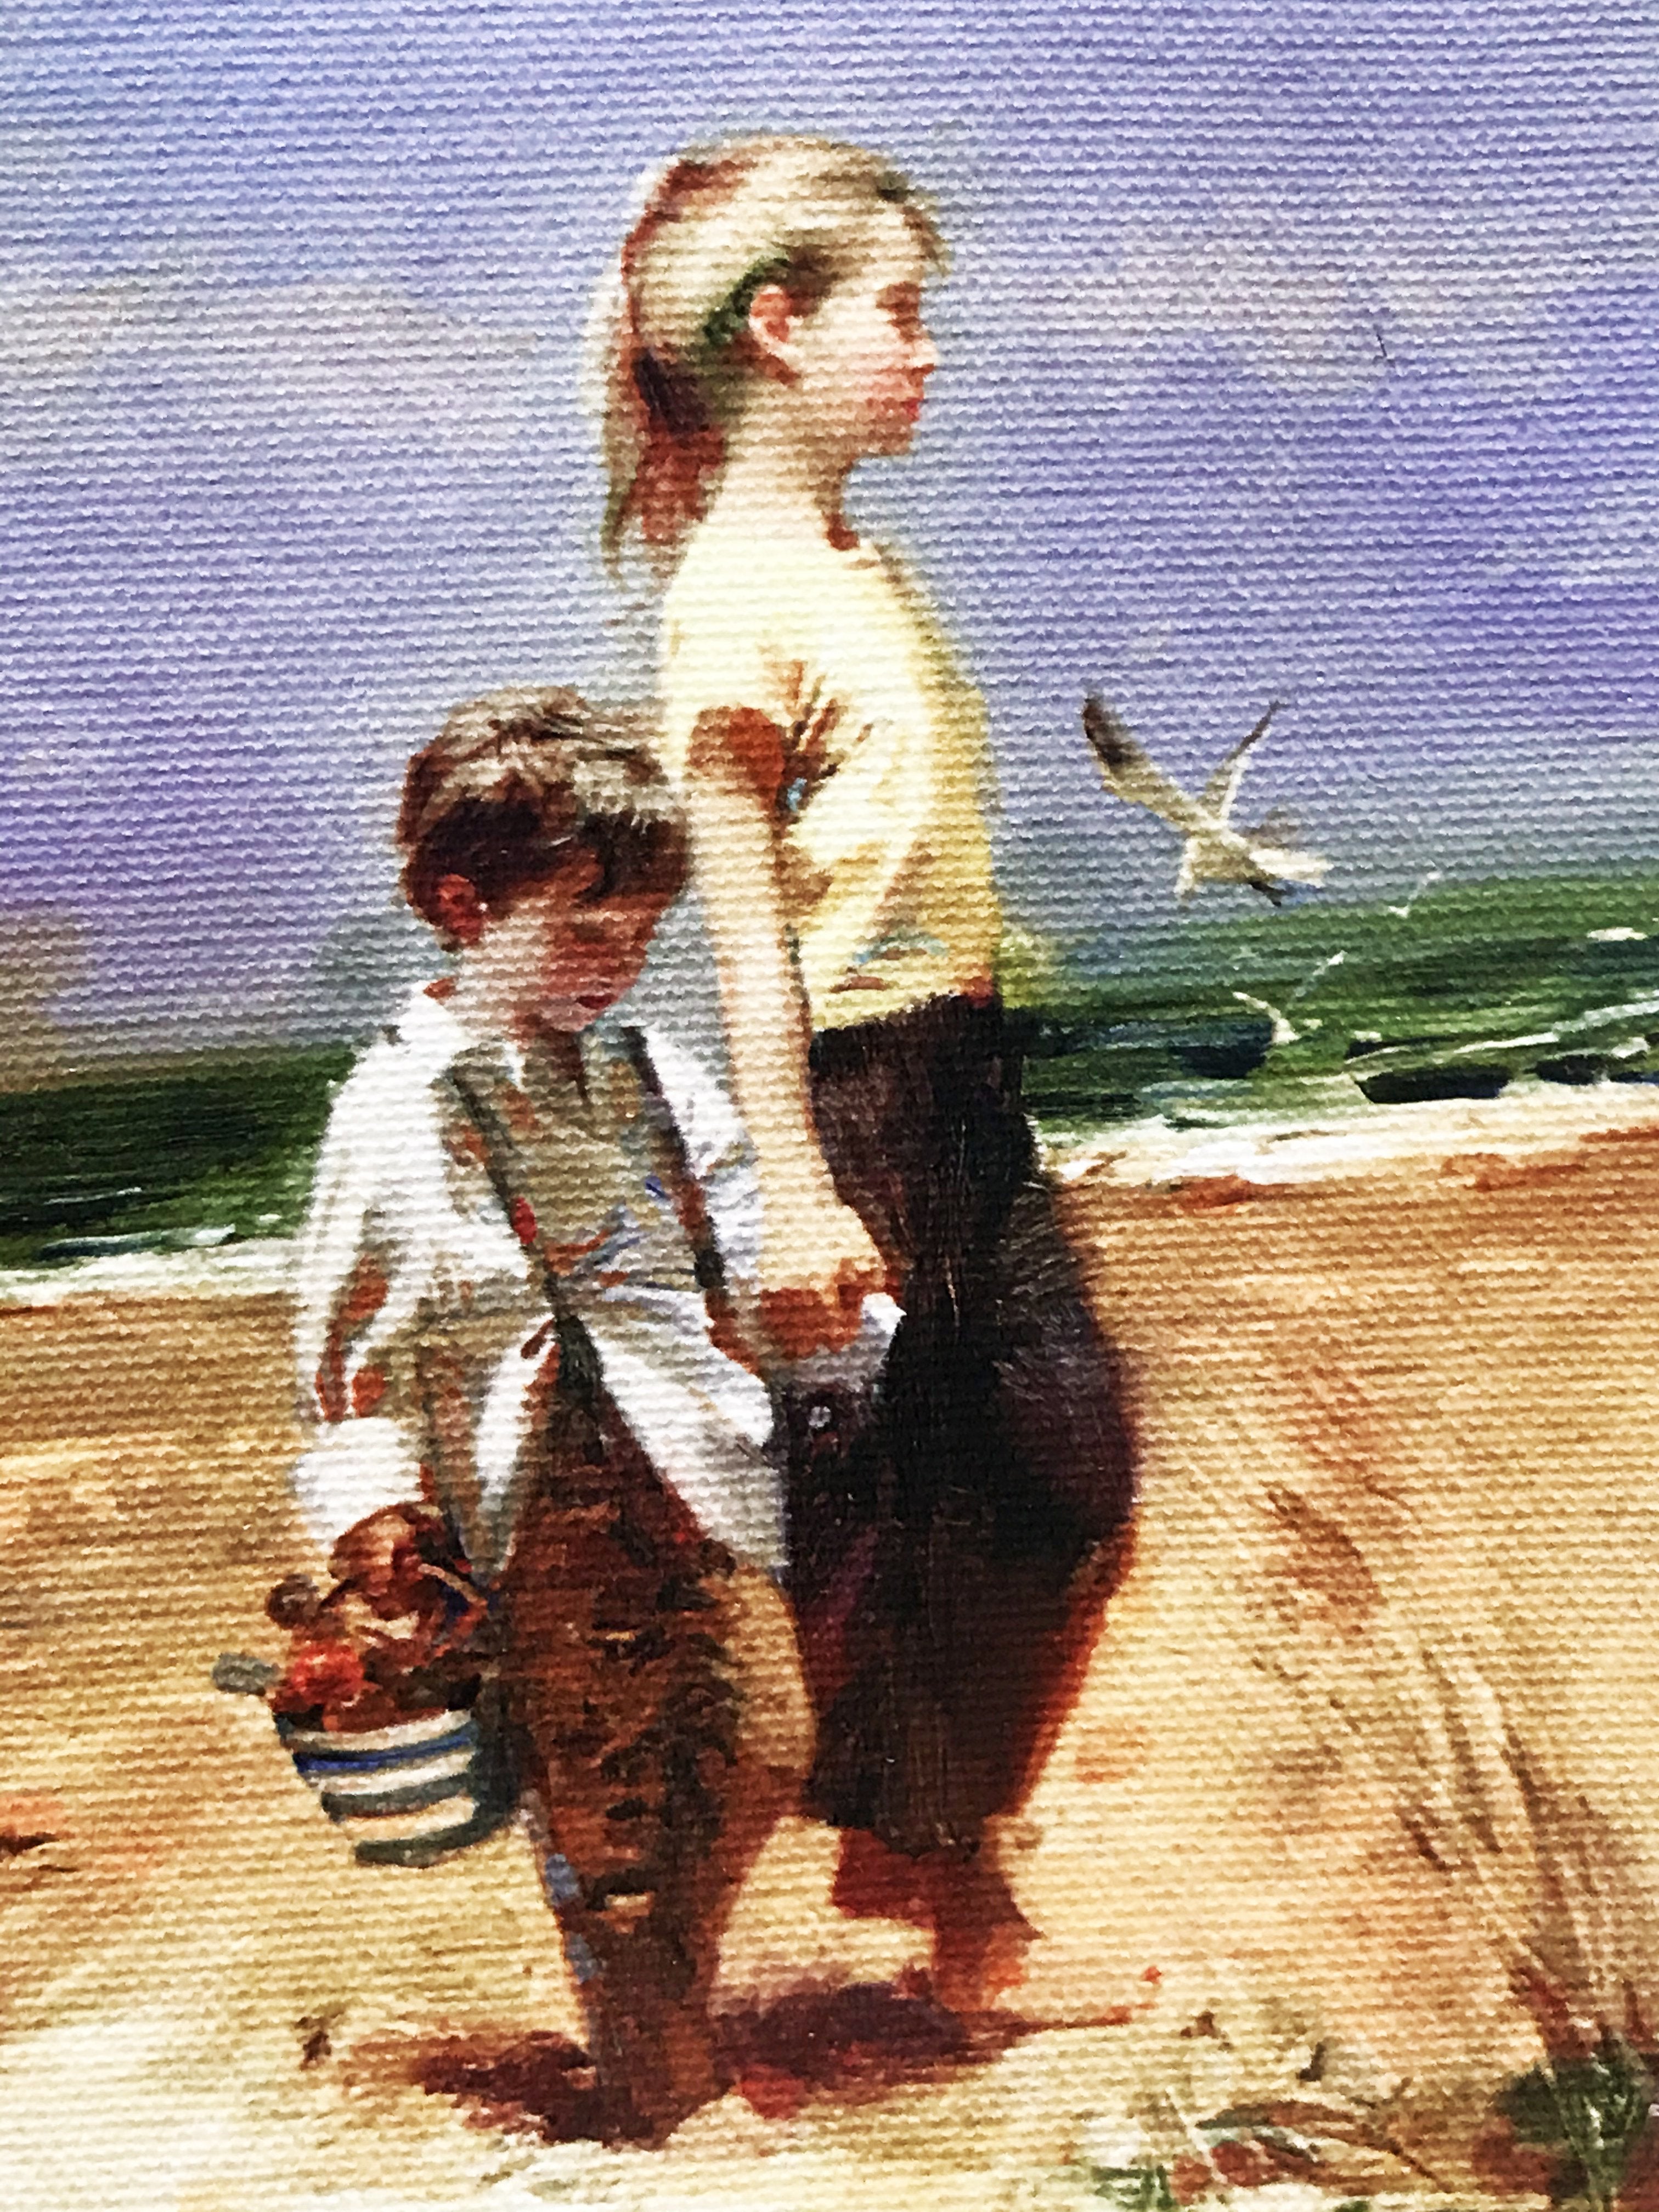 Seaside Gathering Pino Daeni Canvas Giclée Print Artist Hand Signed and Numbered